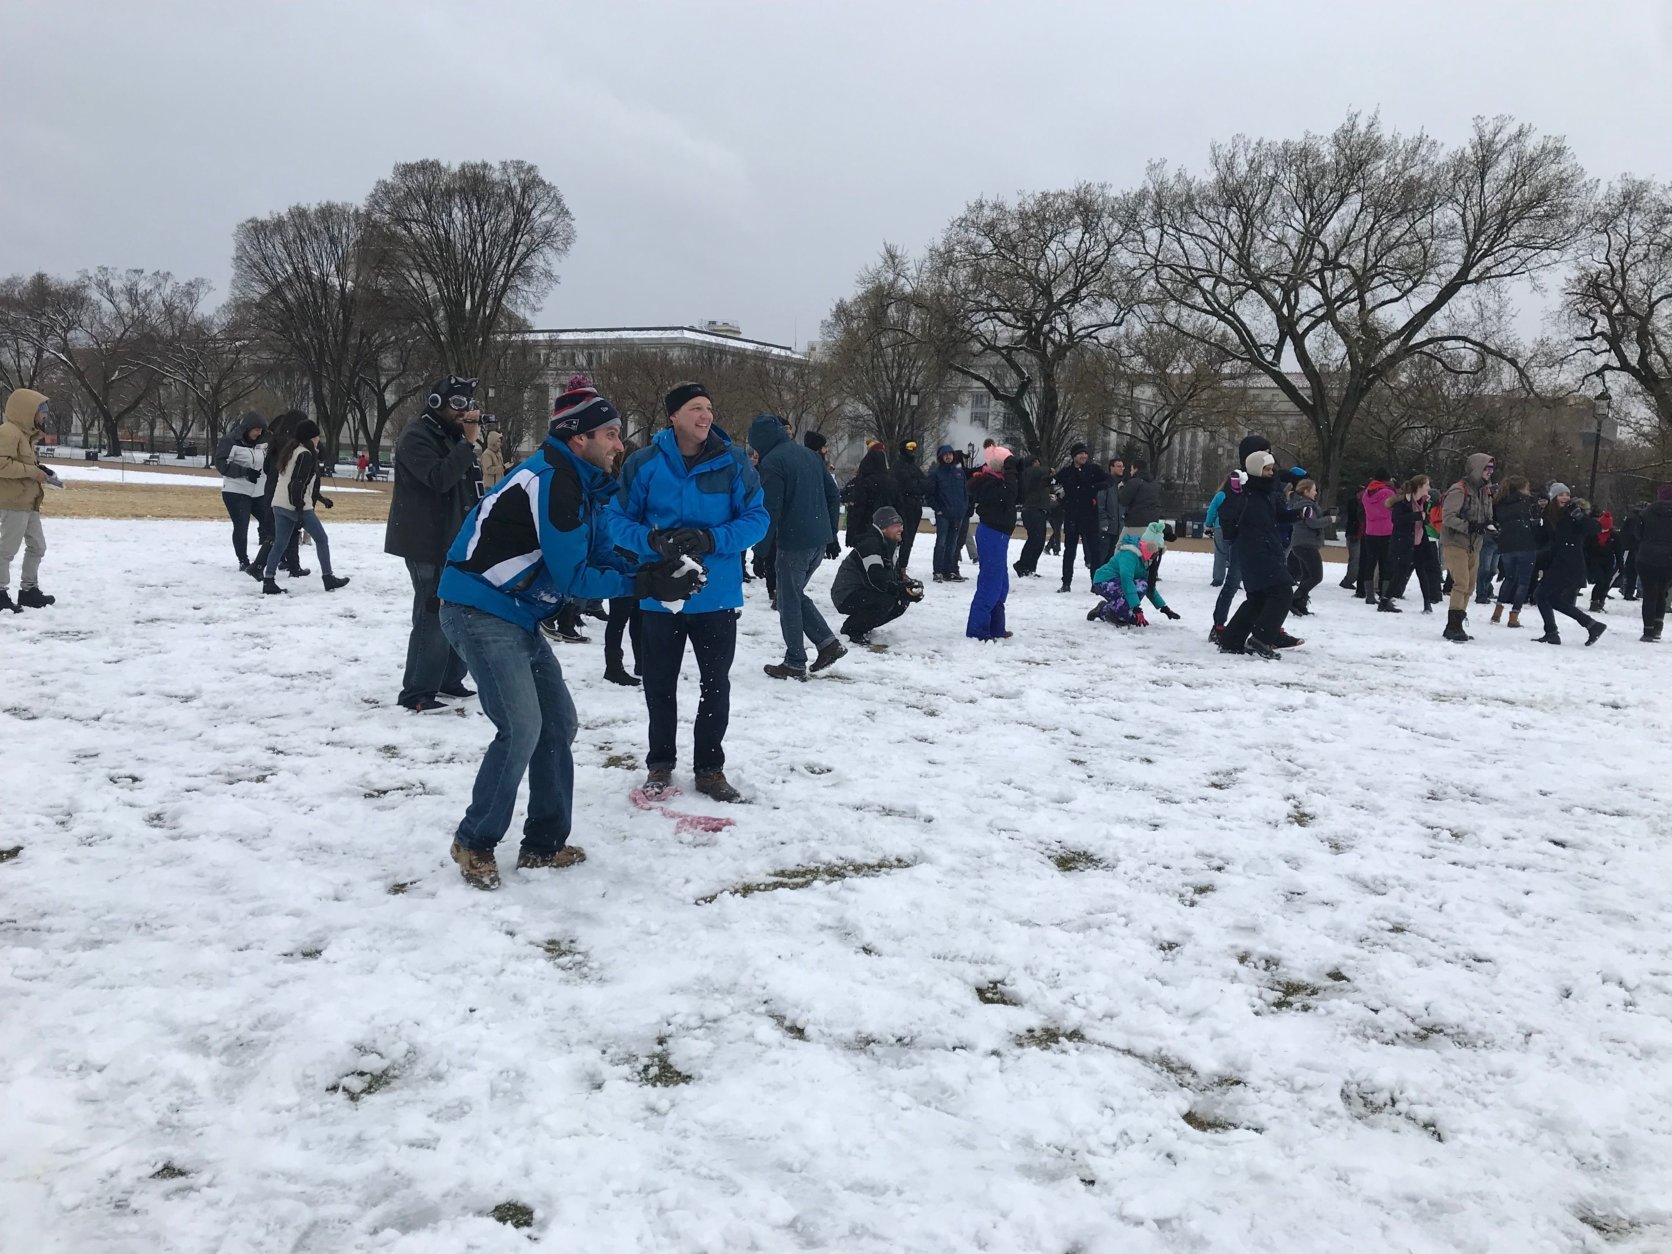 A man prepares to throw a snowball during a snowball fight that organized at the National Mall on Wednesday, March 21, 2018. (WTOP/Dick Uliano)